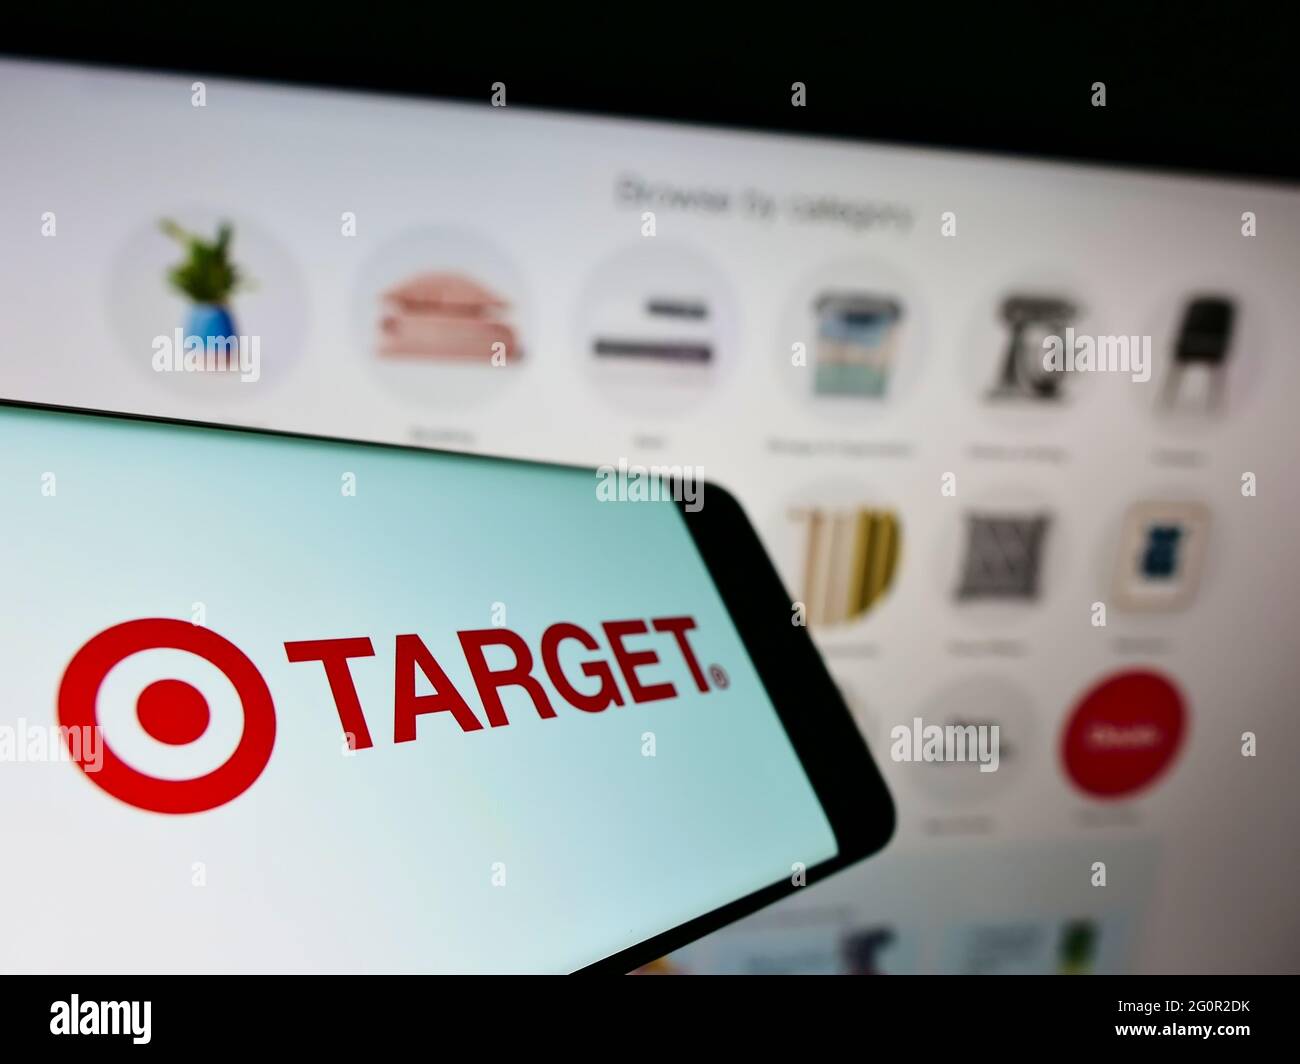 Cellphone with logo of US retail company Target Corporation on screen in front of business website. Focus on center-left of phone display. Stock Photo